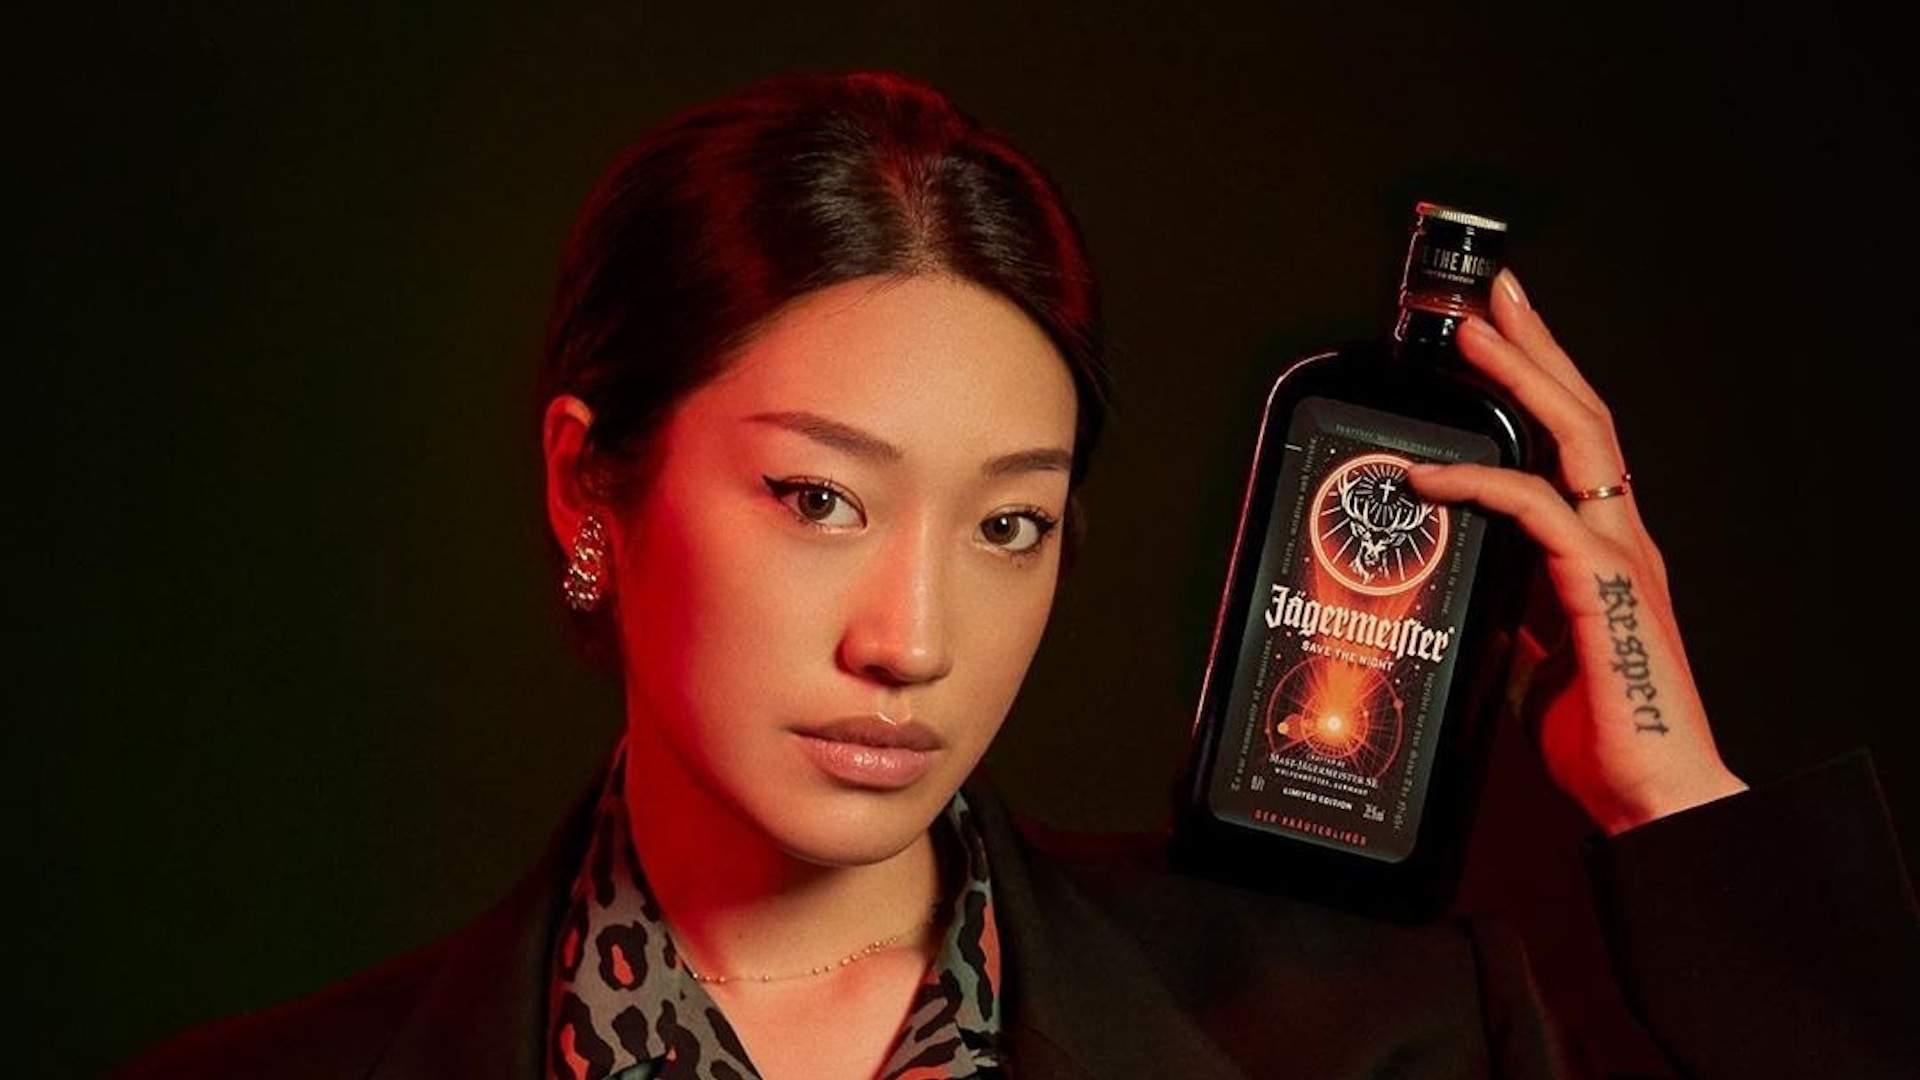 Jagermeister's Limited-Edition 'Save the Night' Bottle